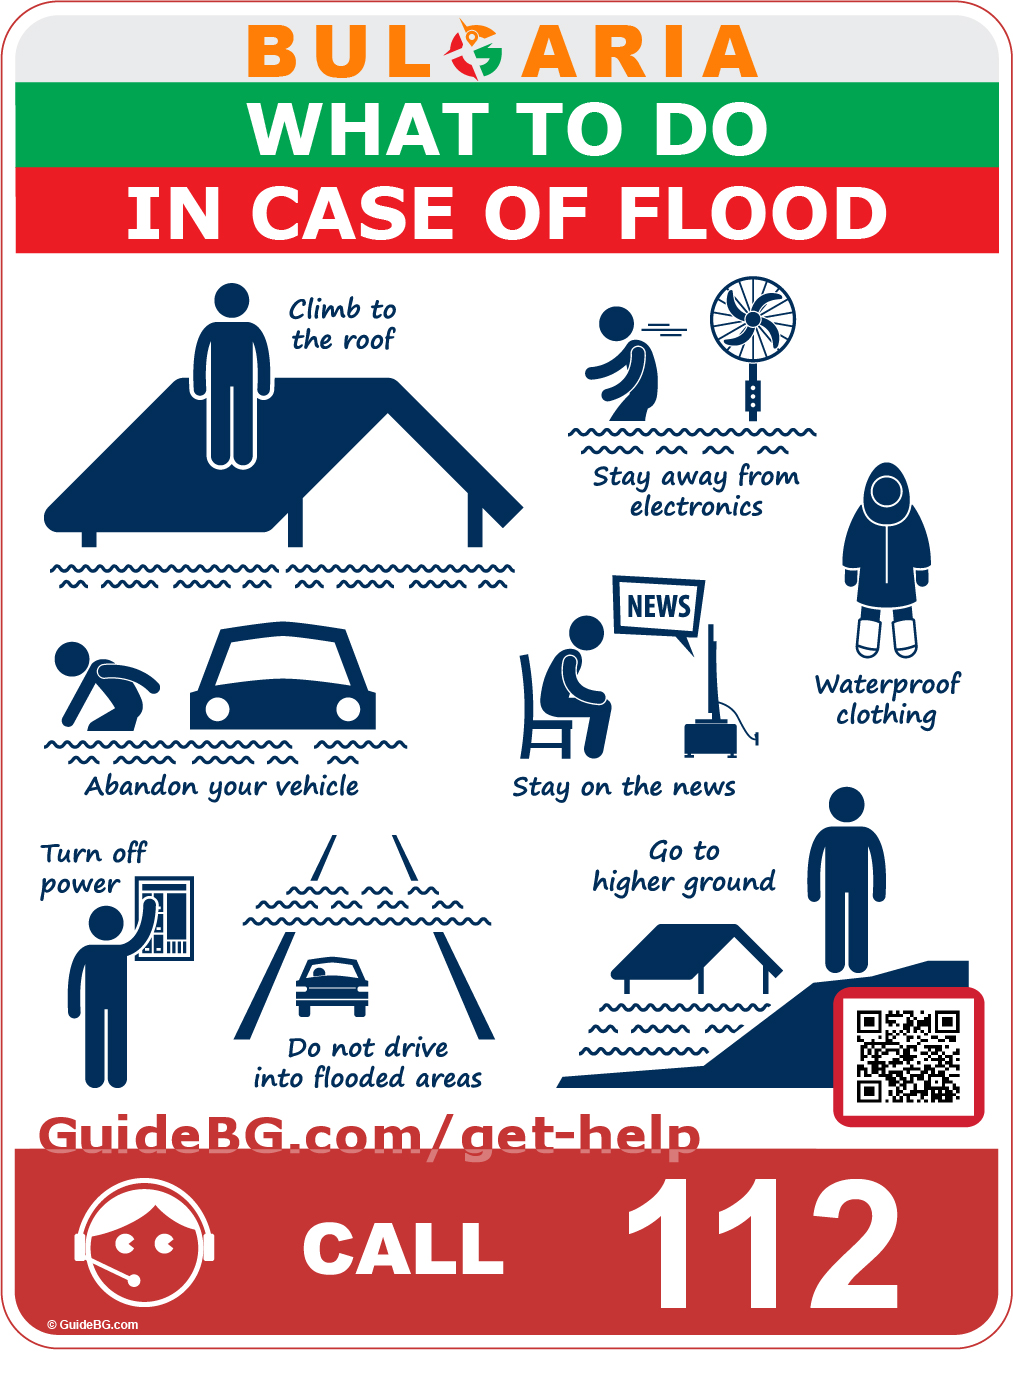 What to do in case of a flood?